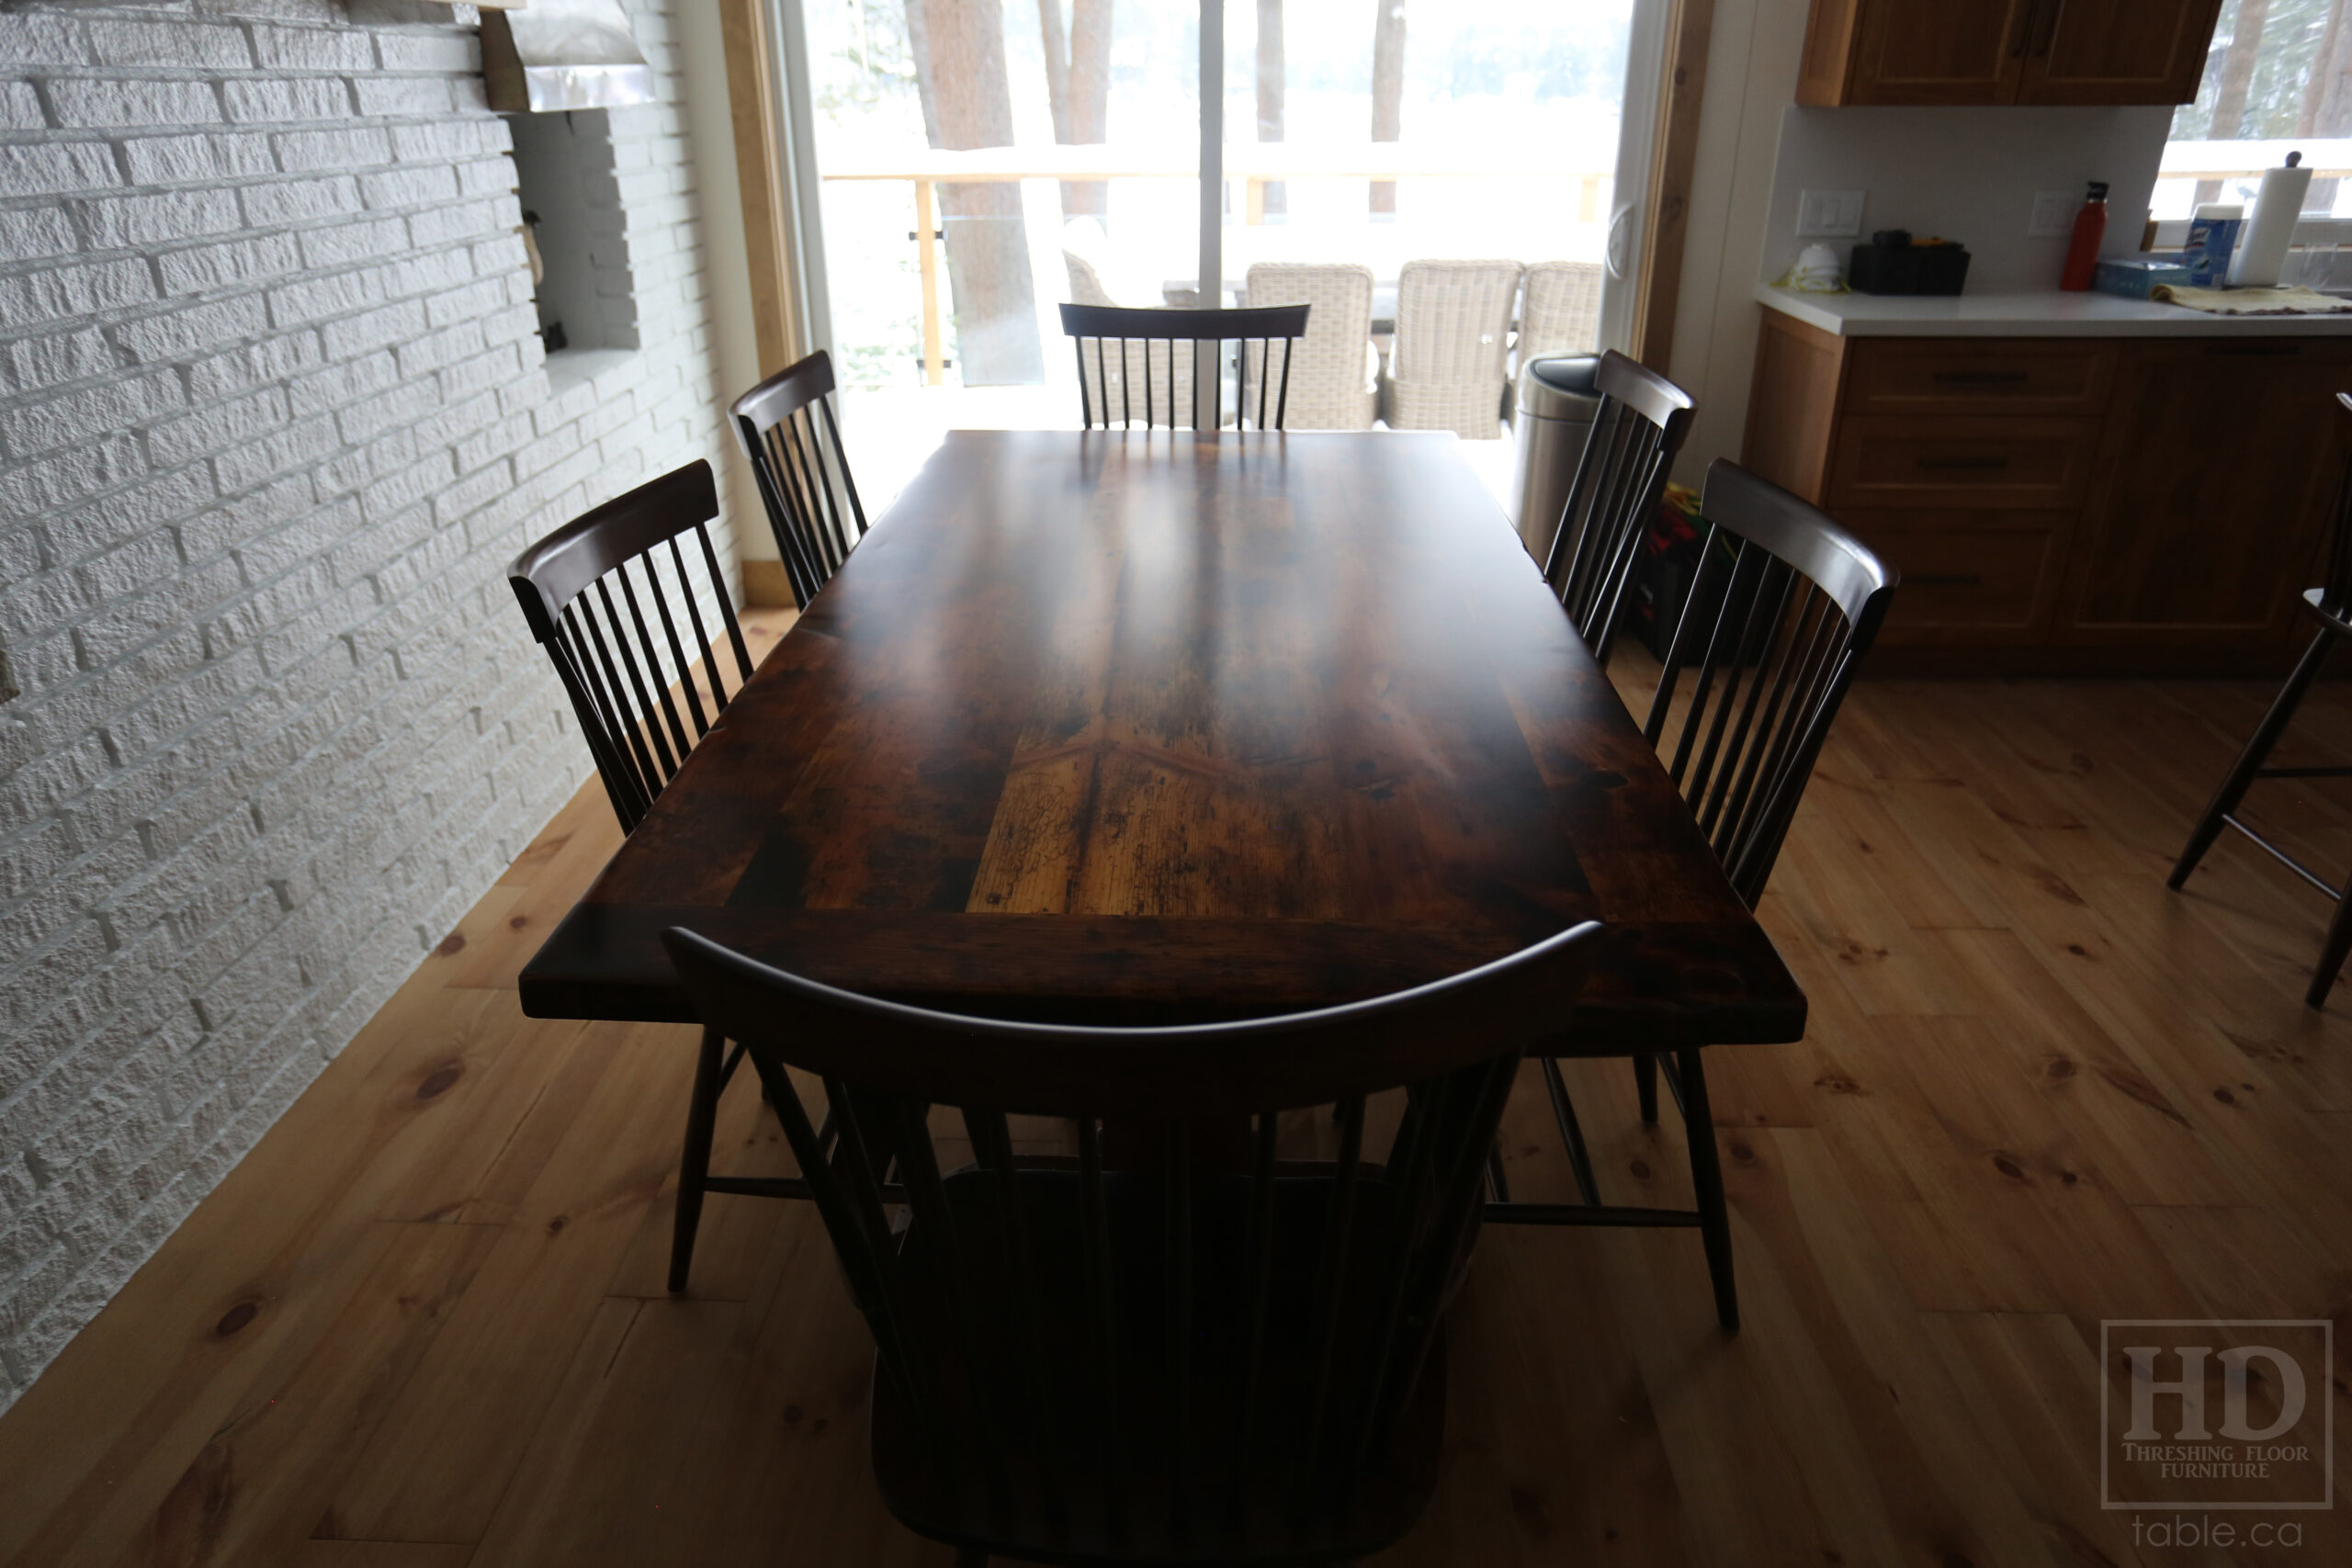 7' Reclaimed Ontario Barnwood Pedestal Table we made for a Bala home - Hand Hewn Posts Base - Old Growth Pine Threshing Floor Construction - Original edges & distressing maintained - Premium epoxy + satin polyurethane finish - [6] Shaker Chairs / Wormy Maple - [3] Shaker Stools - www.table.ca